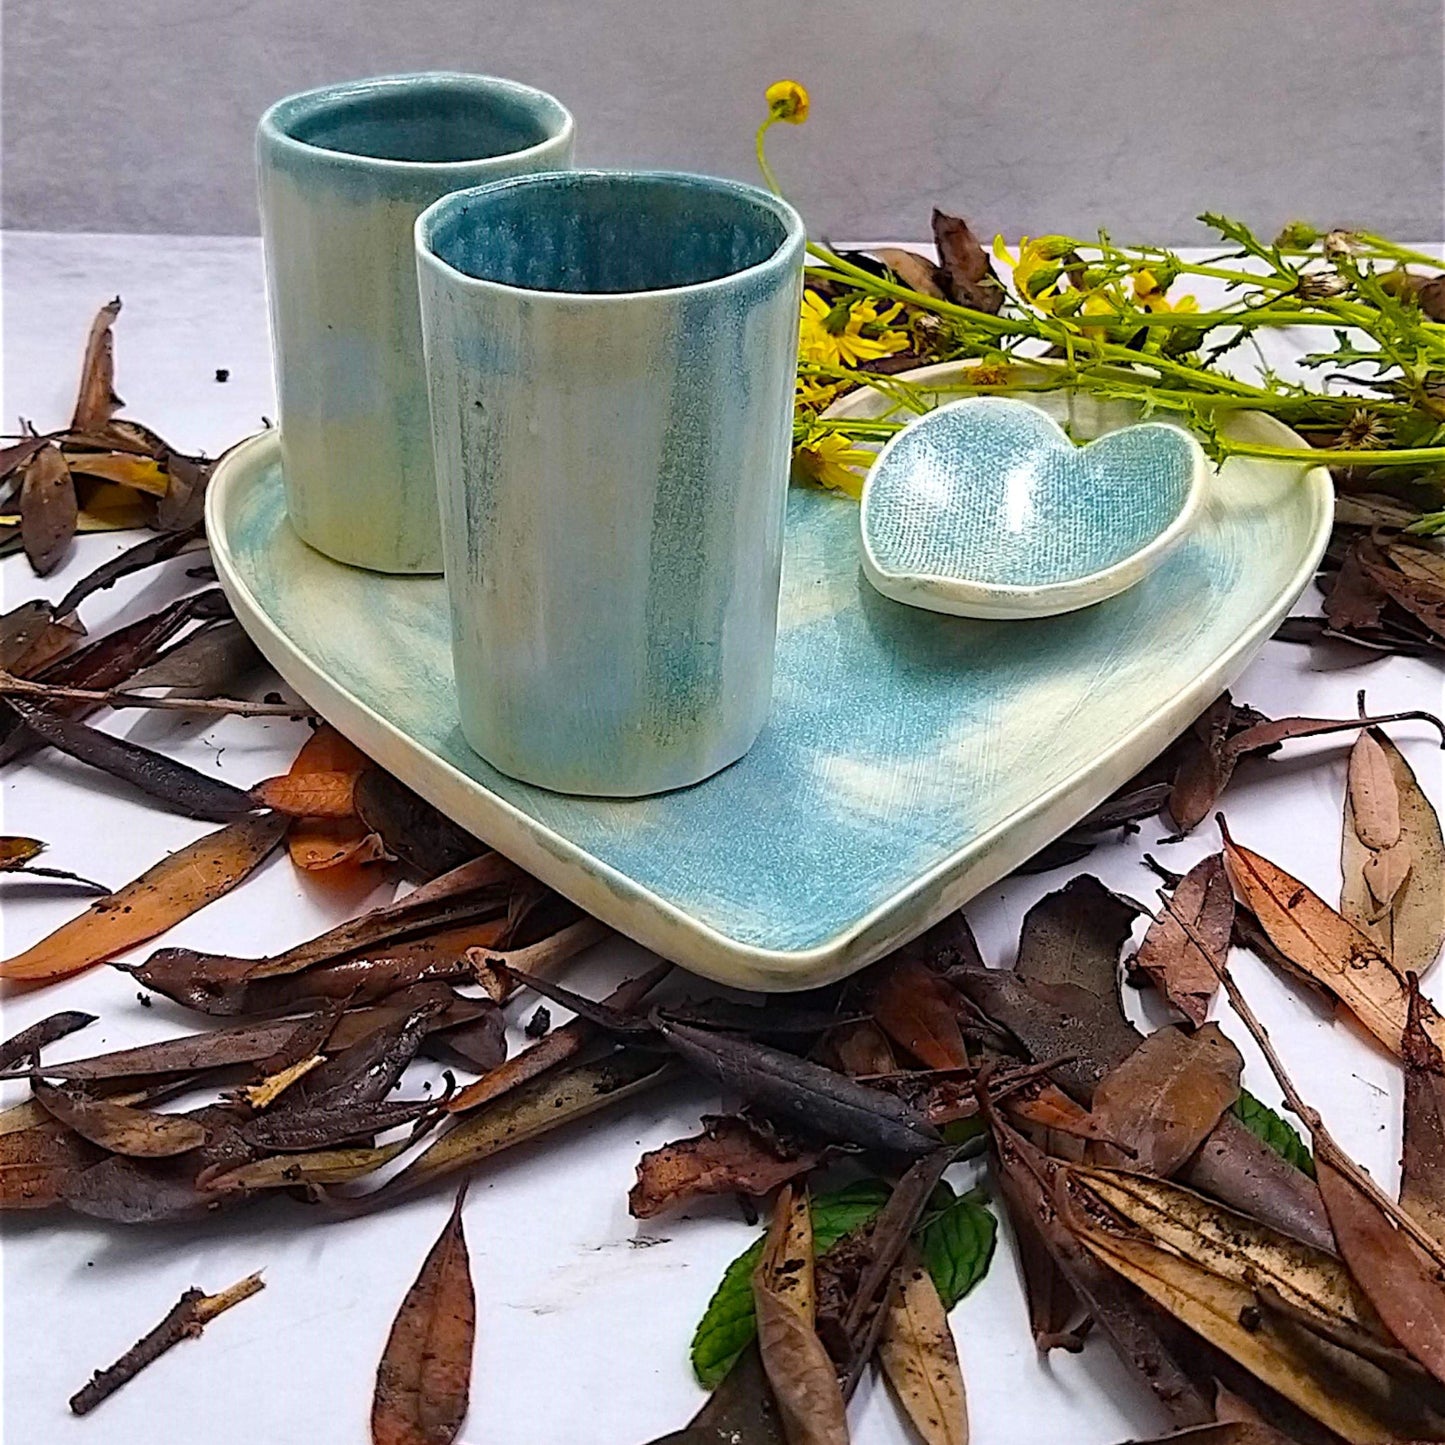 Two ceramic cups on heart plate